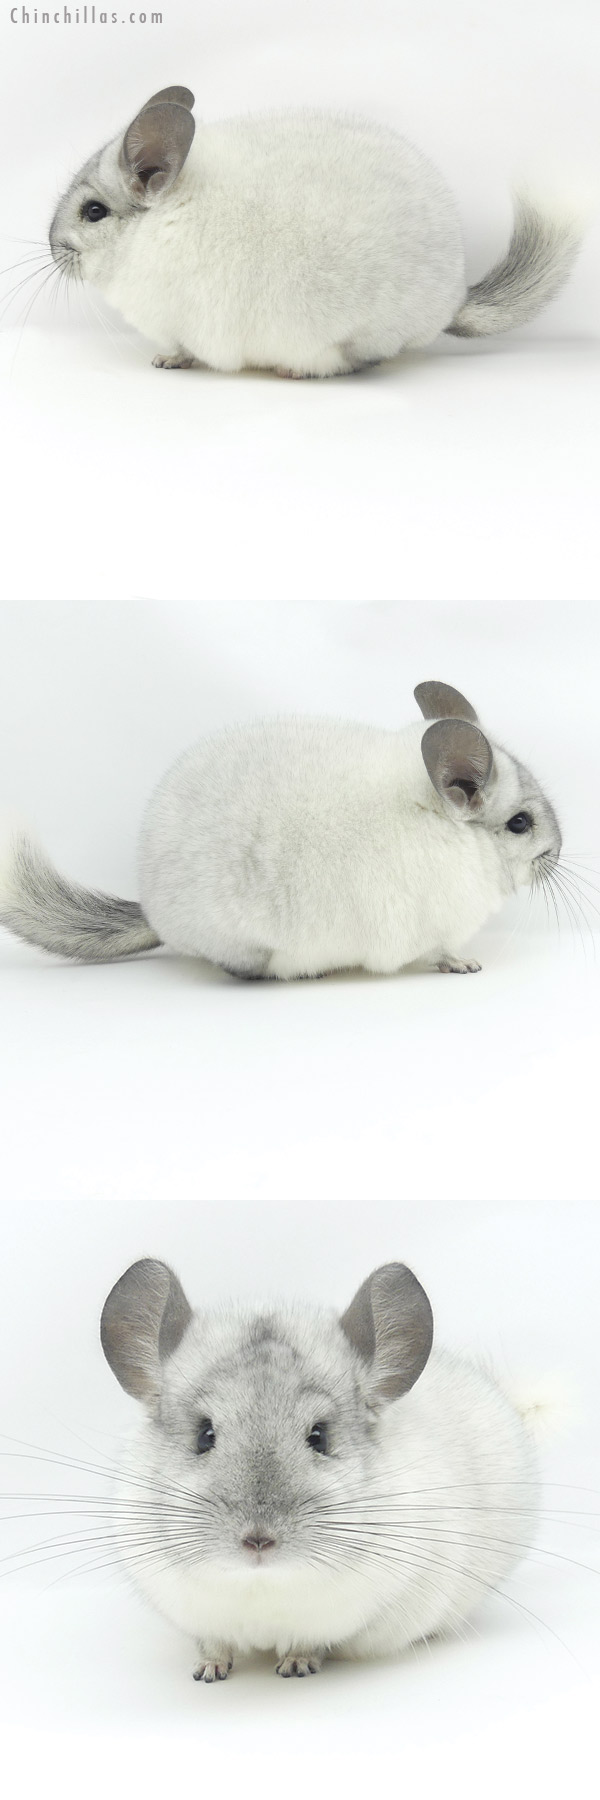 Chinchilla or related item offered for sale or export on Chinchillas.com - 20003 Blocky Herd Improvement Quality White Mosaic Male Chinchilla